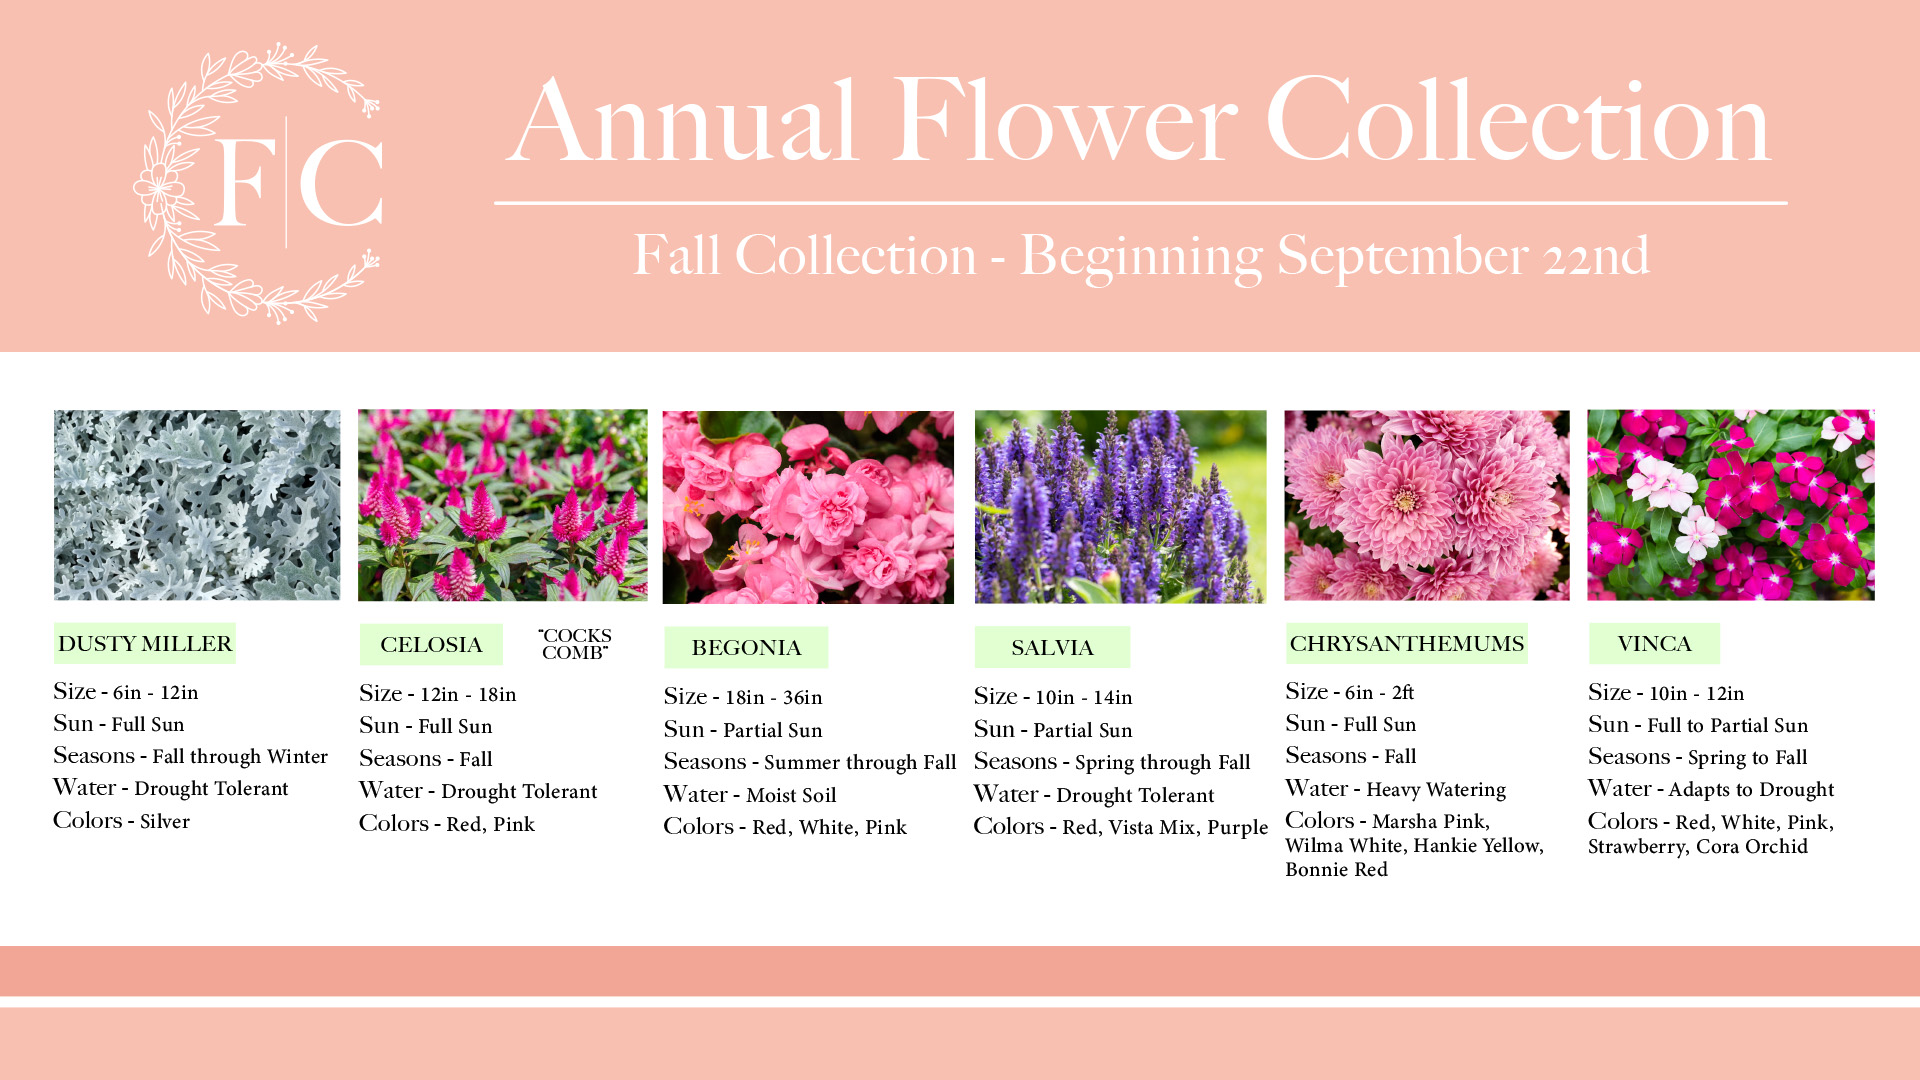 https://fortmyersgardenservice.com/wp-content/uploads/2022/11/FMGS-Annuals-Web-Graphics_Fall-Collection.jpg